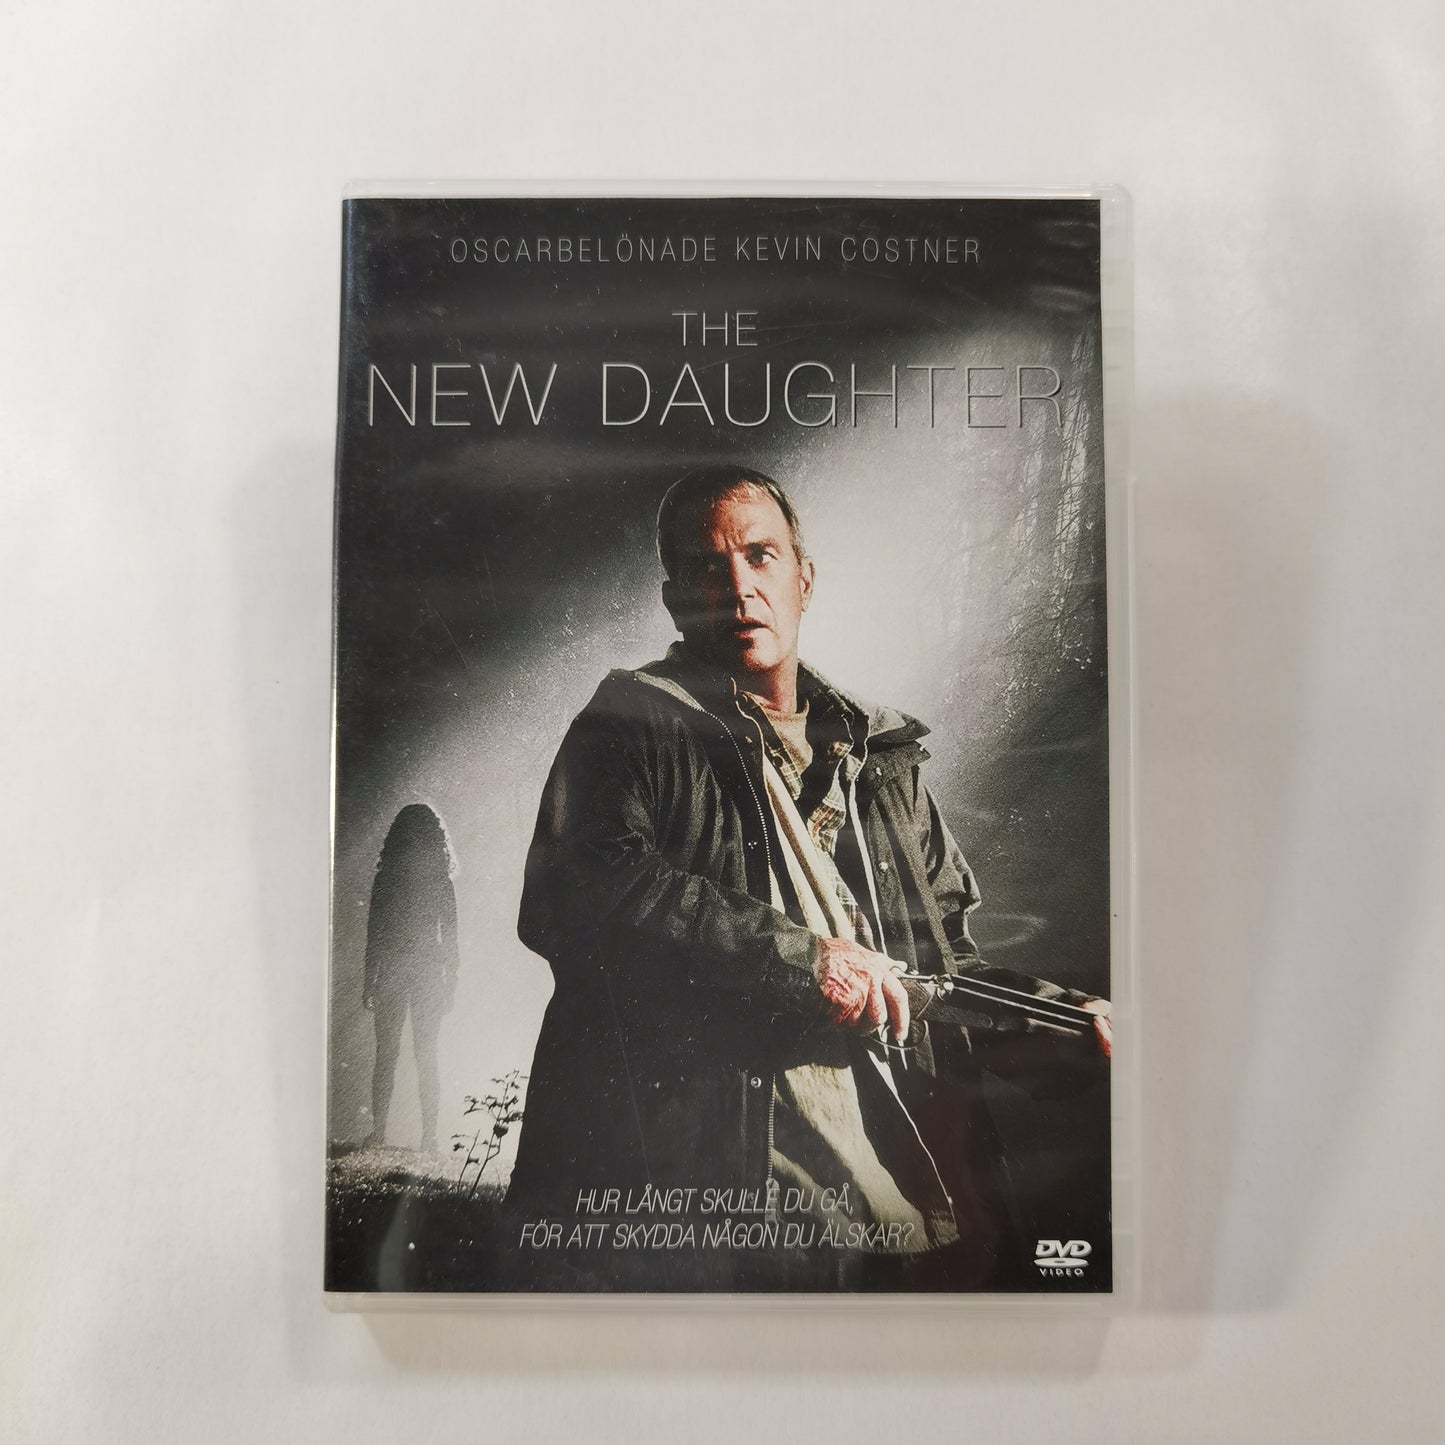 The New Daughter (2009) - DVD SE 2010